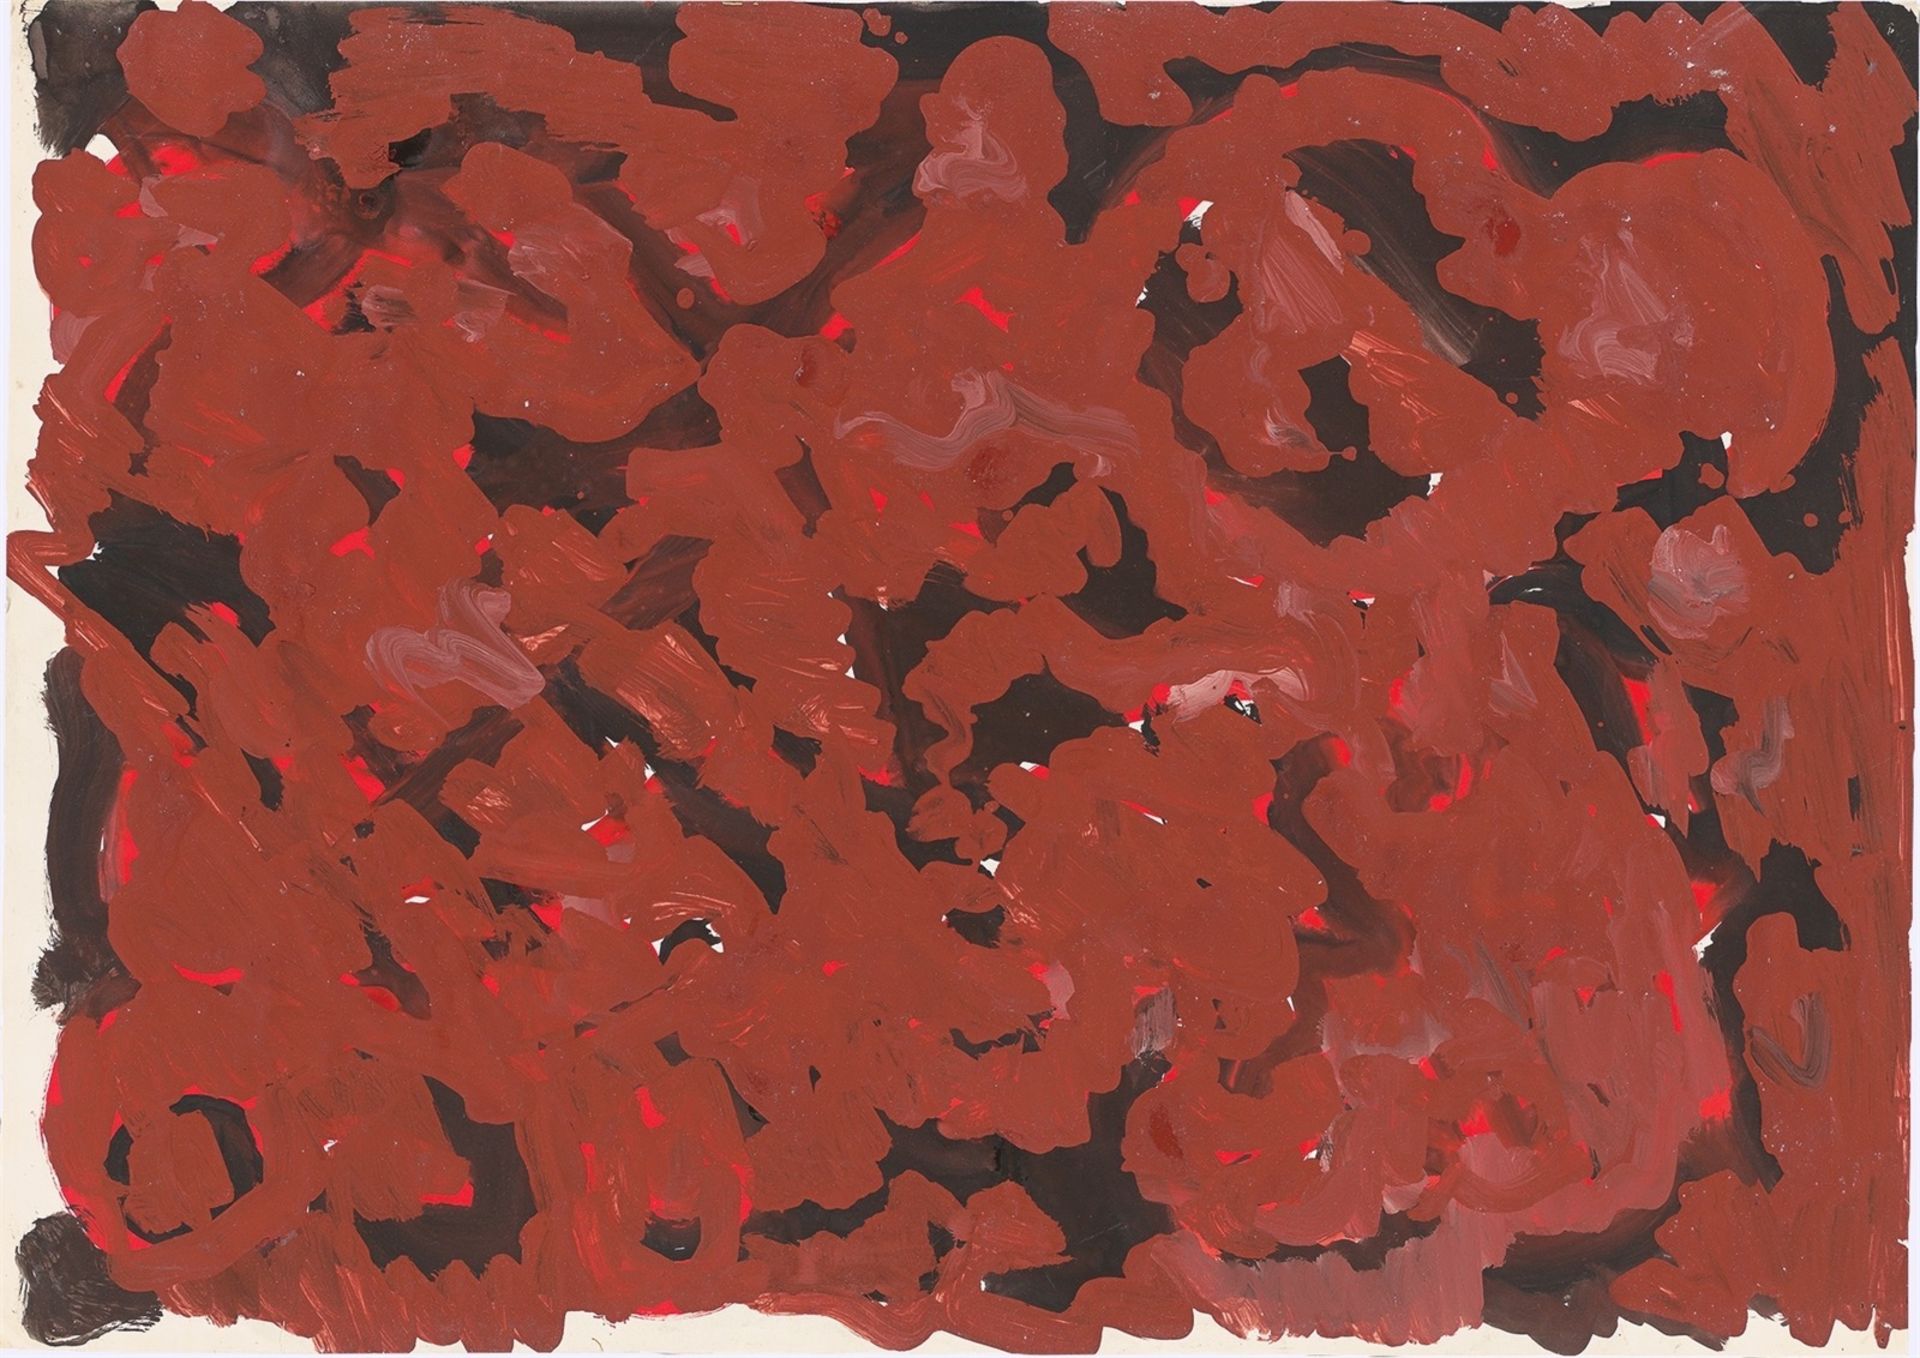 A.R. Penck. Untitled. 1975/76 - Image 8 of 10